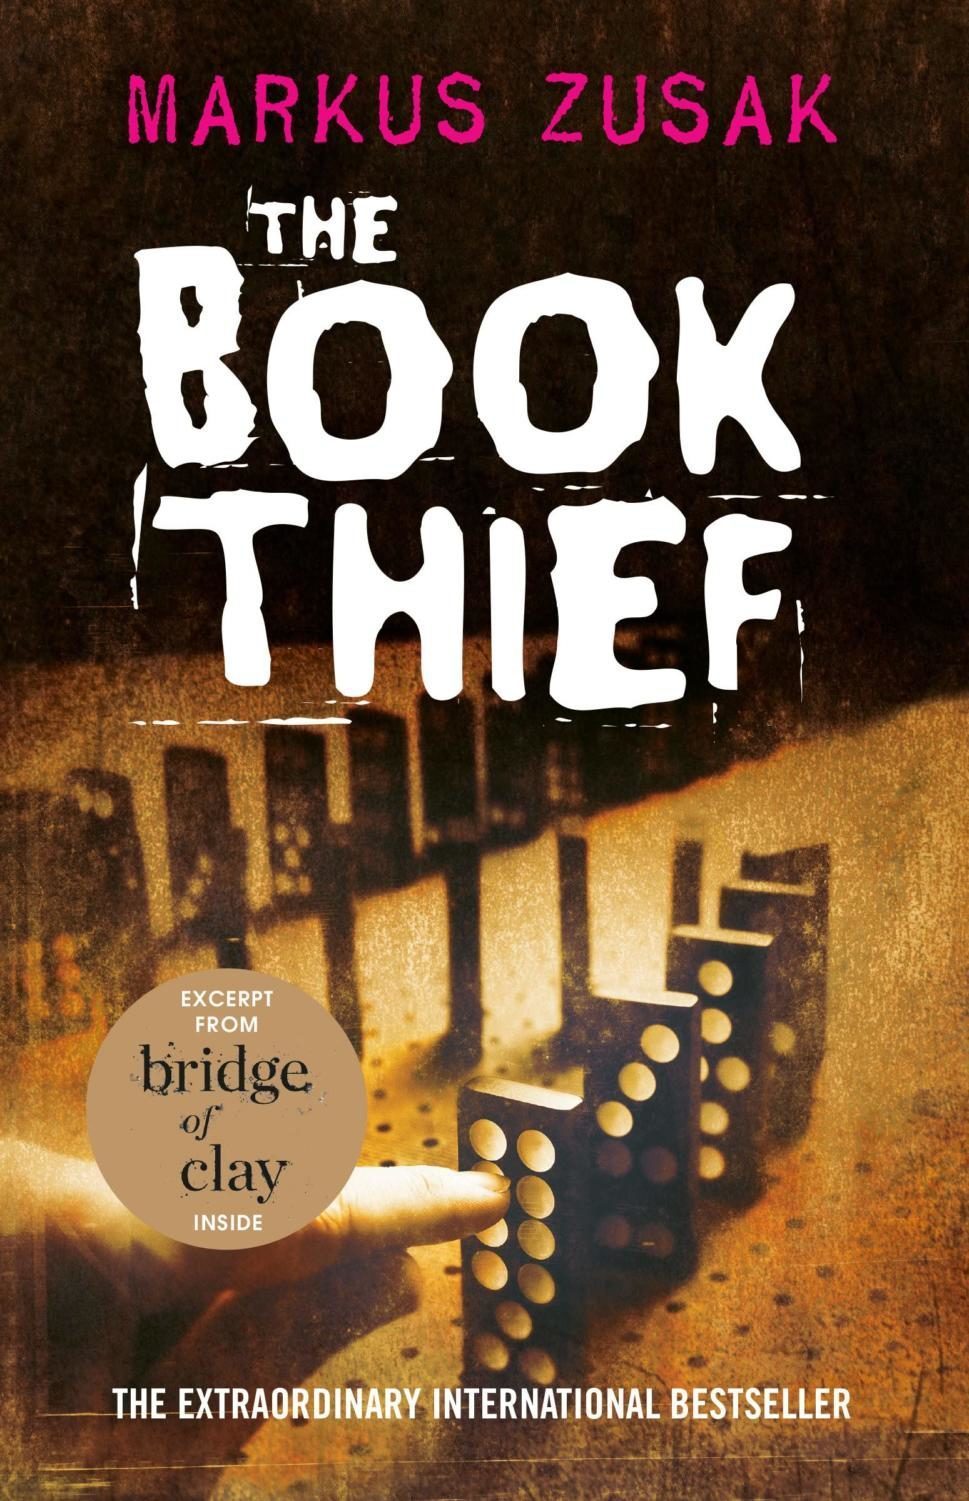 Entertainment Review ― The Book Thief